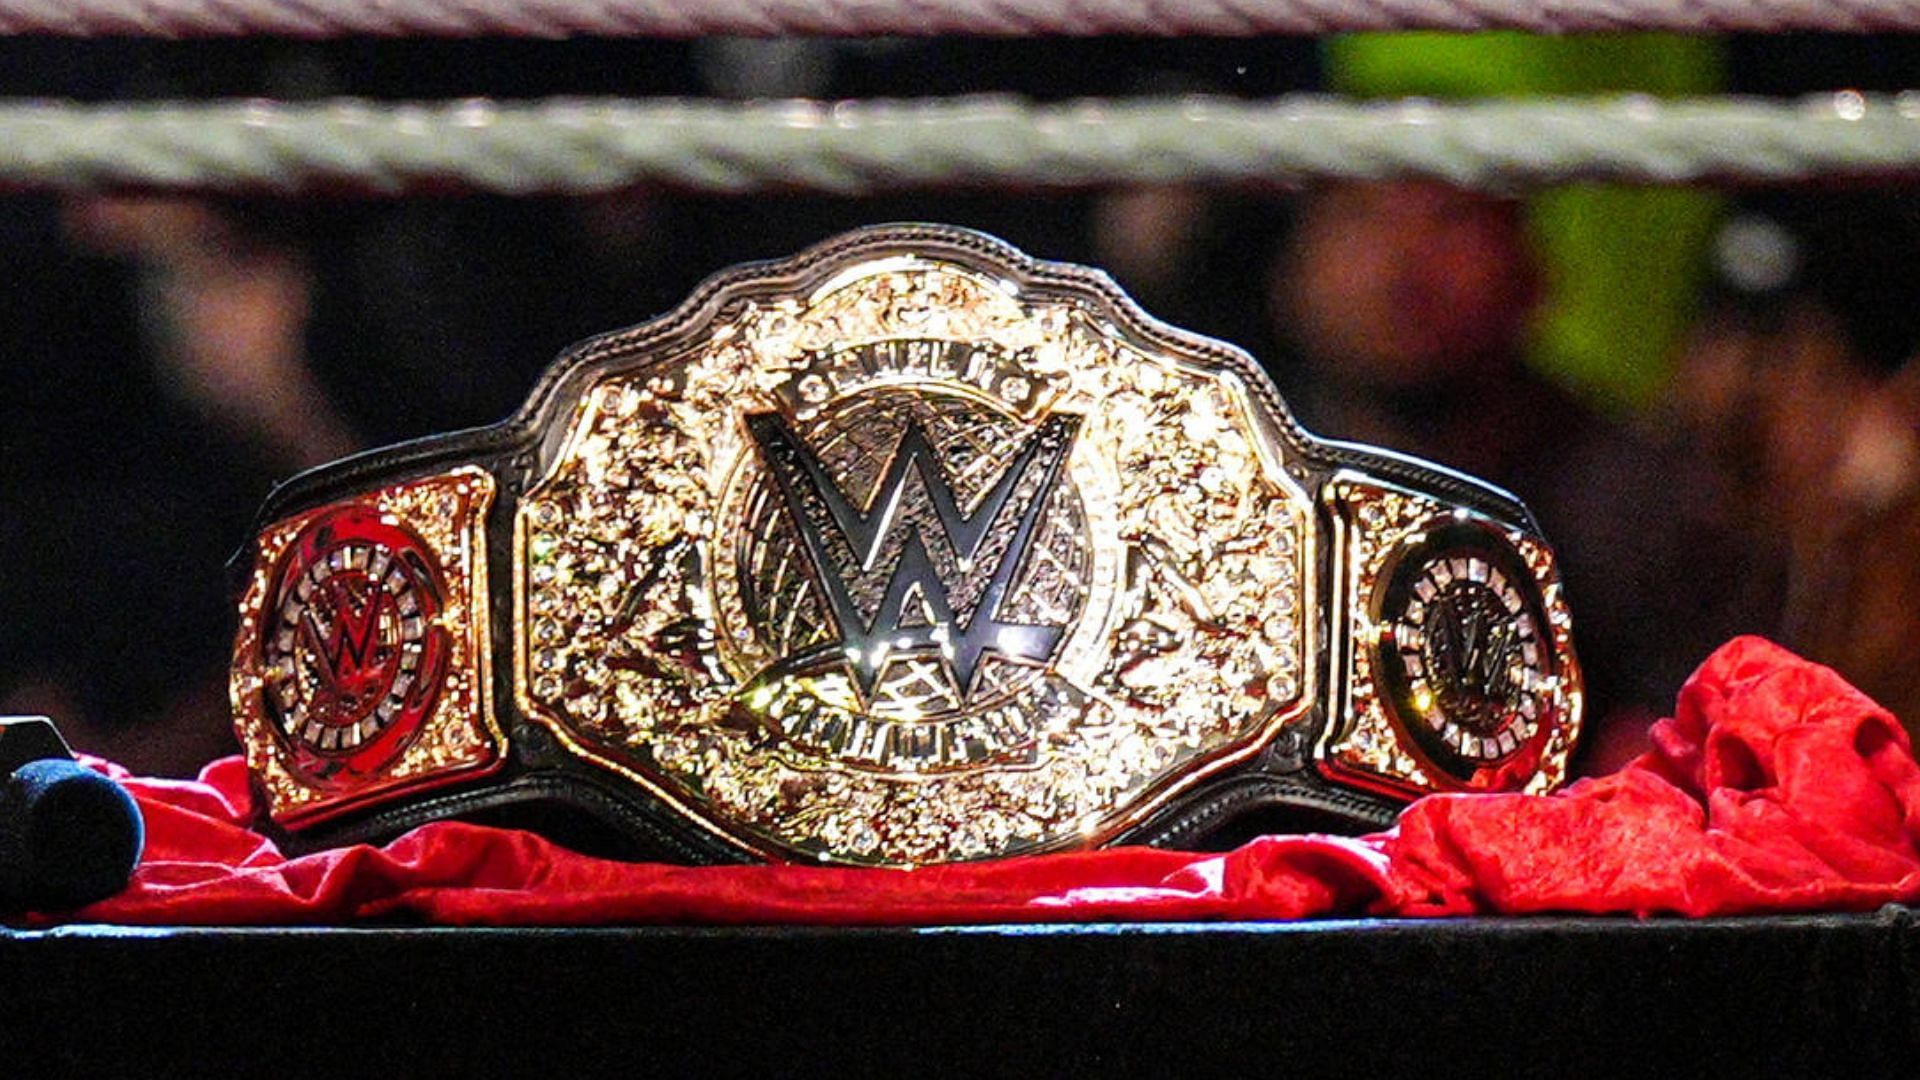 Triple H recently introduced new World Heavyweight Championship!